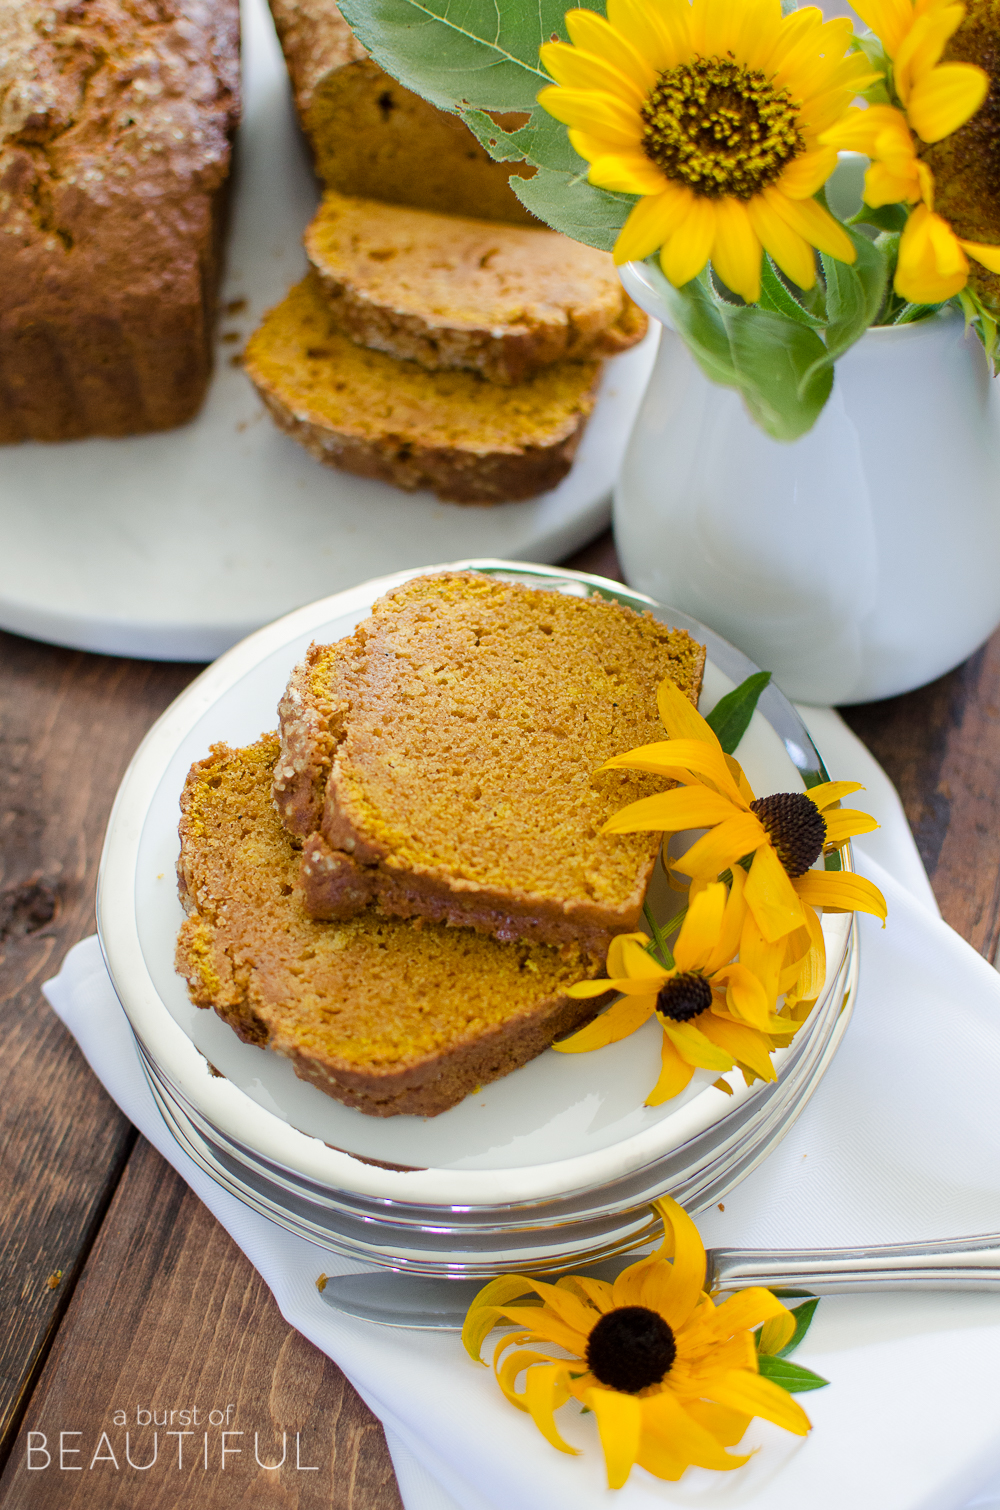 This simple pumpkin loaf is the perfect fall treat